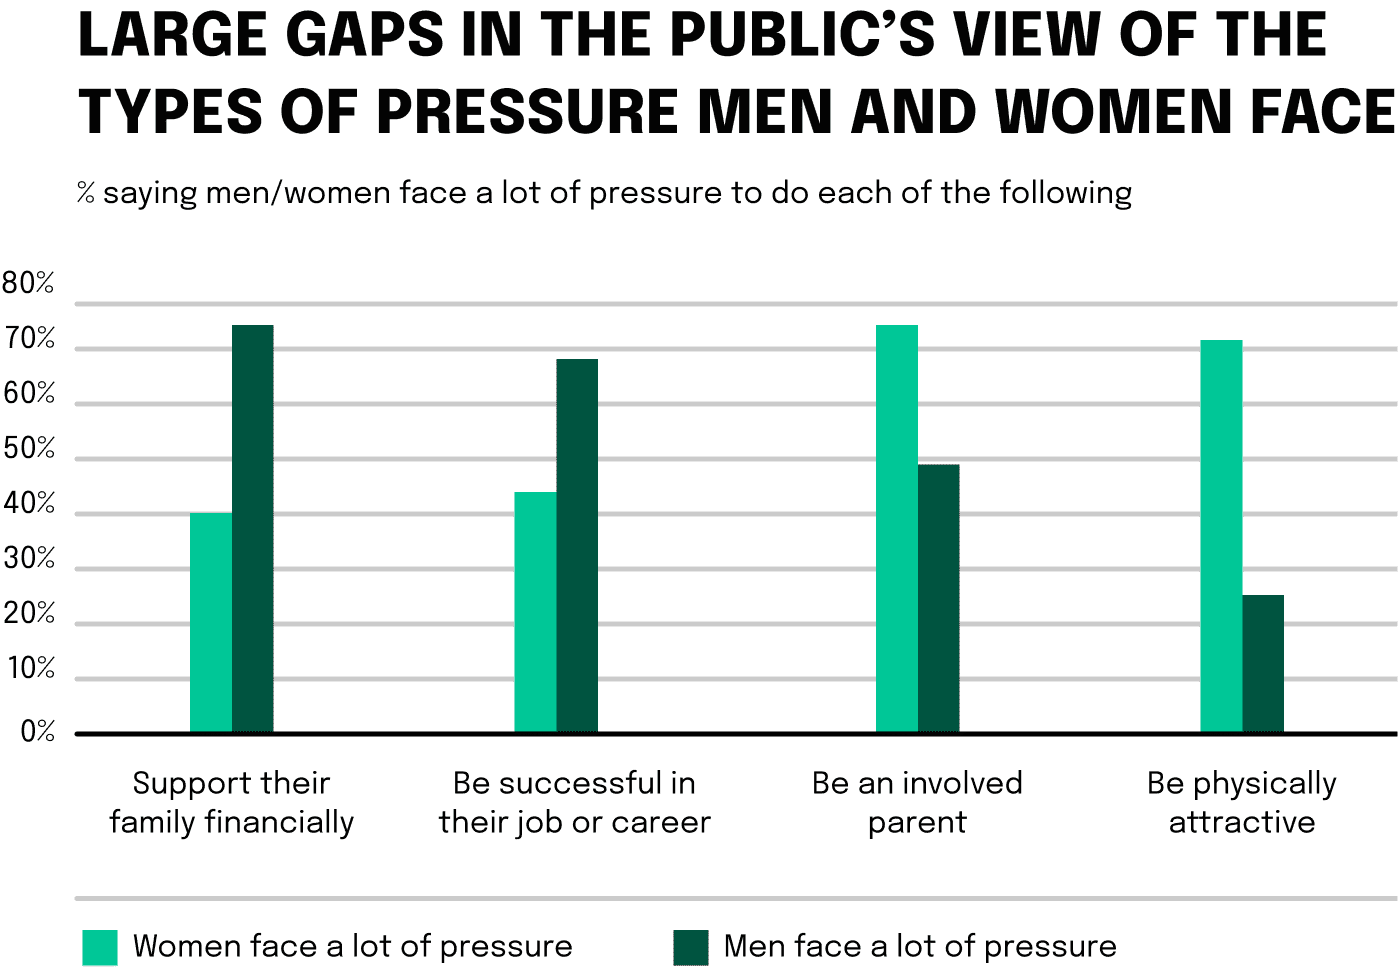 The public has very different views on what society values most in men and women. While many say that honesty, morality and professional success should be the focus for men, the most important qualities for women are physical attractiveness, caring, and empathy. Additionally, 11% specifically mention mothering duties, and 6% mention qualities such as kindness and helpfulness. Social pressure also emphasizes significantly different areas of life.